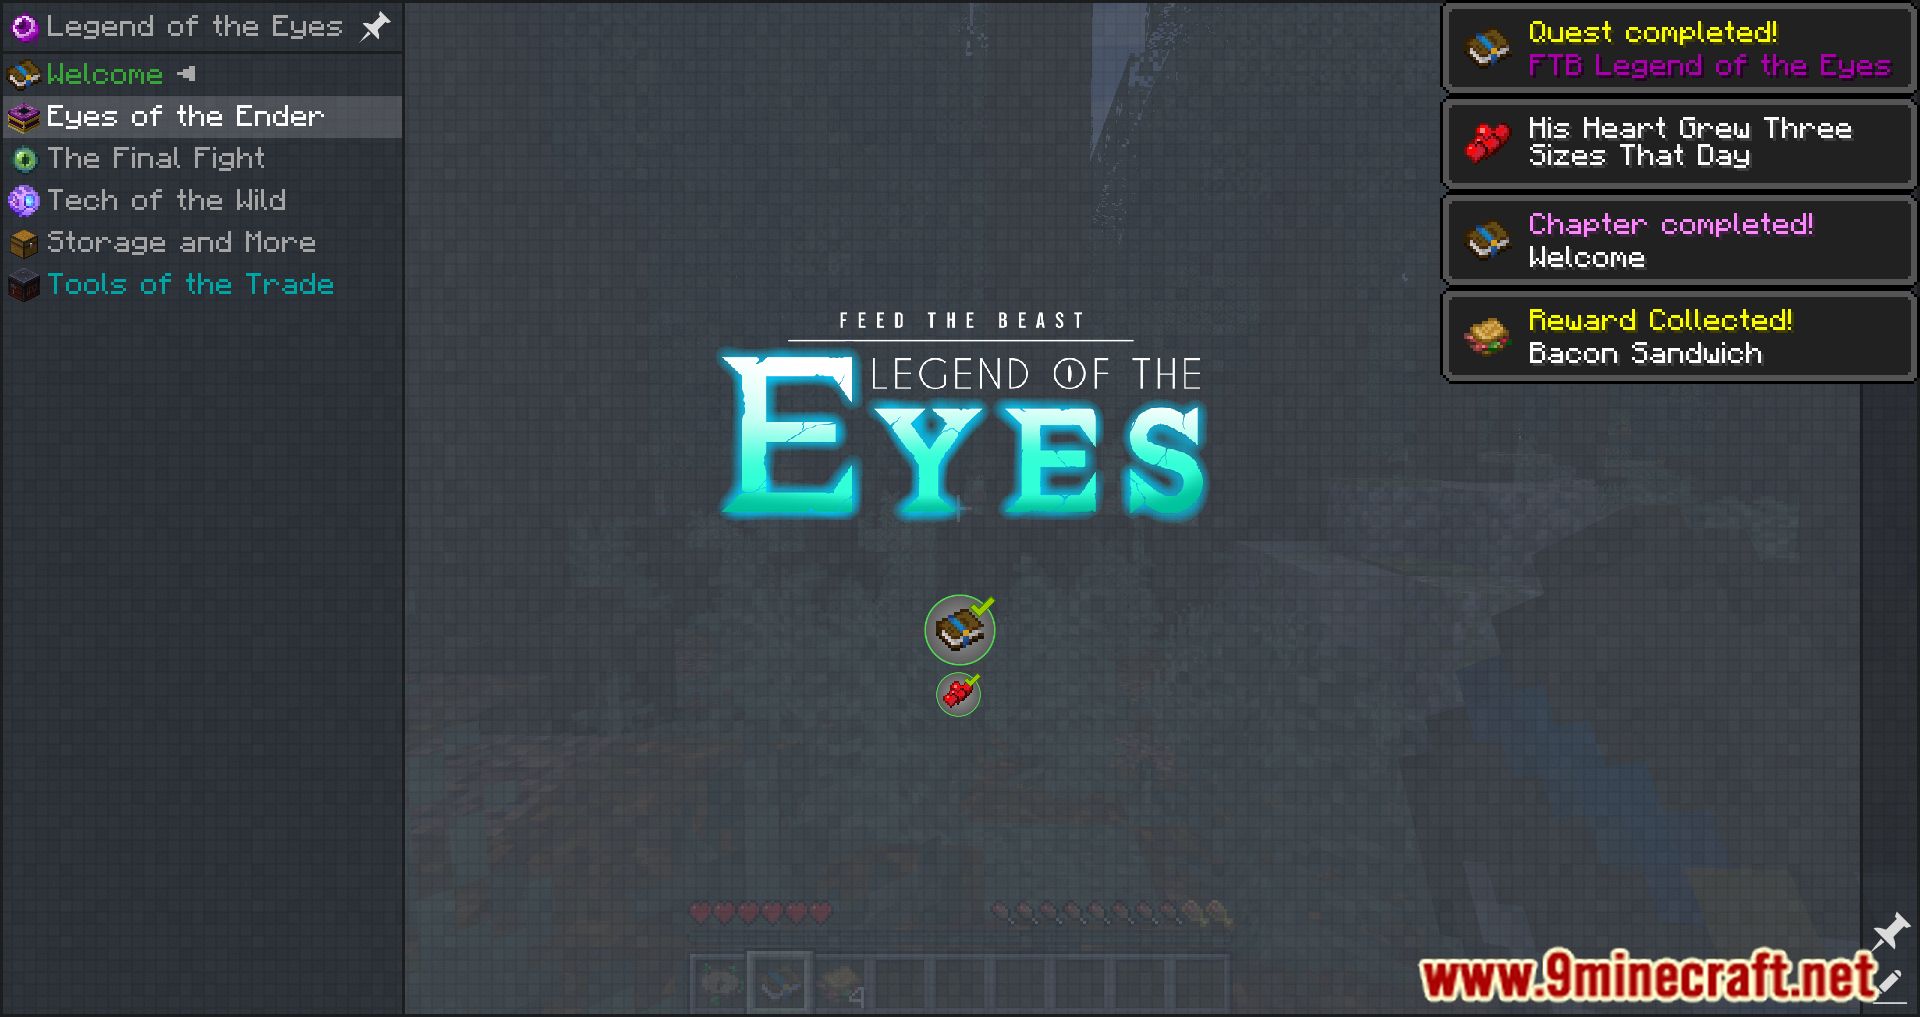 FTB Legend of the Eyes Modpack (1.19.2) - Exploration, Adventure, And Danger! 10